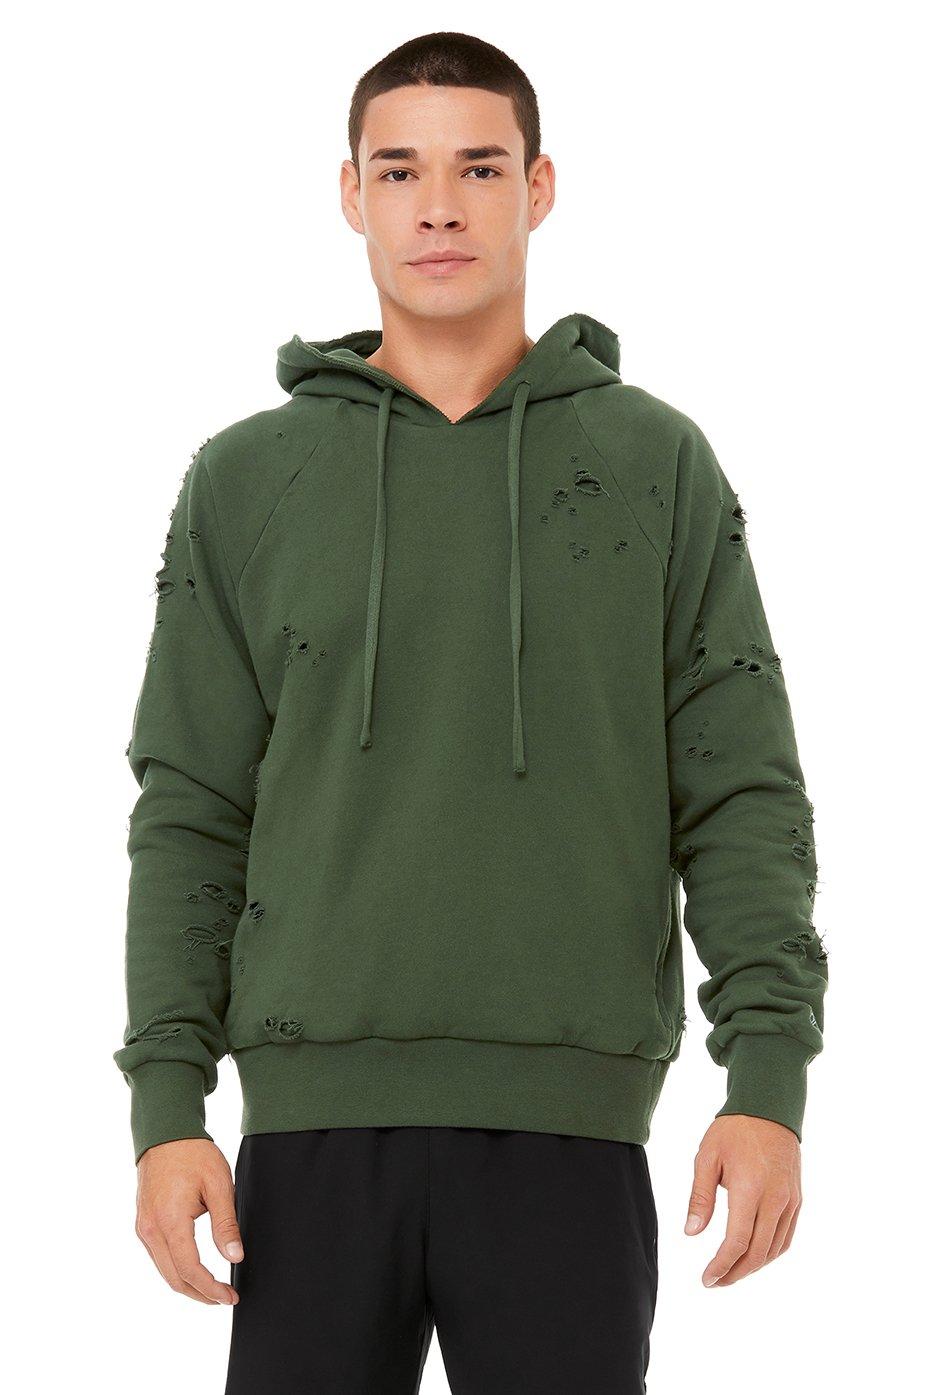 Alo Yoga Alo Yoga Ripped Hoodie in Green for Men - Lyst